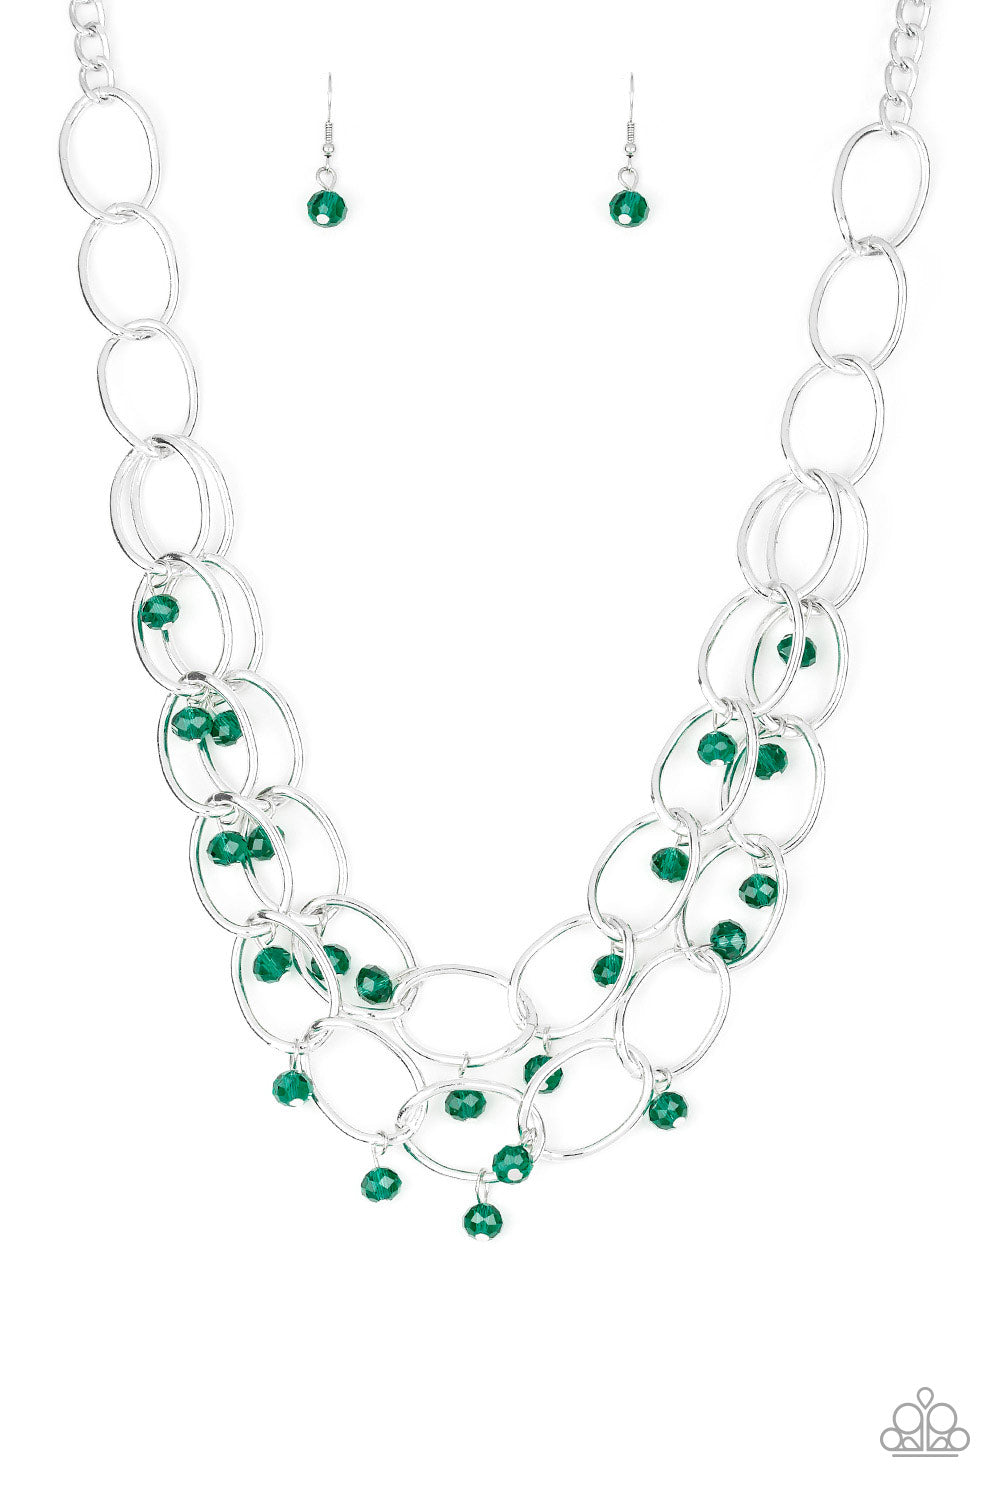 &lt;P&gt;Green crystal-like beads swing from two layers of oversized silver links below the collar for a refined look. Features an adjustable clasp closure.&lt;/p&gt;

&lt;P&gt;&lt;i&gt; Sold as one individual necklace.  Includes one pair of matching earrings.
&lt;/i&gt;&lt;/p&gt;

&lt;imgsrc=\&quot;https://d9b54x484lq62.cloudfront.net/paparazzi/shopping/images/517_tag150x115_1.png\&quot; alt=\&quot;New Kit\&quot; align=\&quot;middle\&quot; height=\&quot;50\&quot; width=\&quot;50\&quot;/&gt;